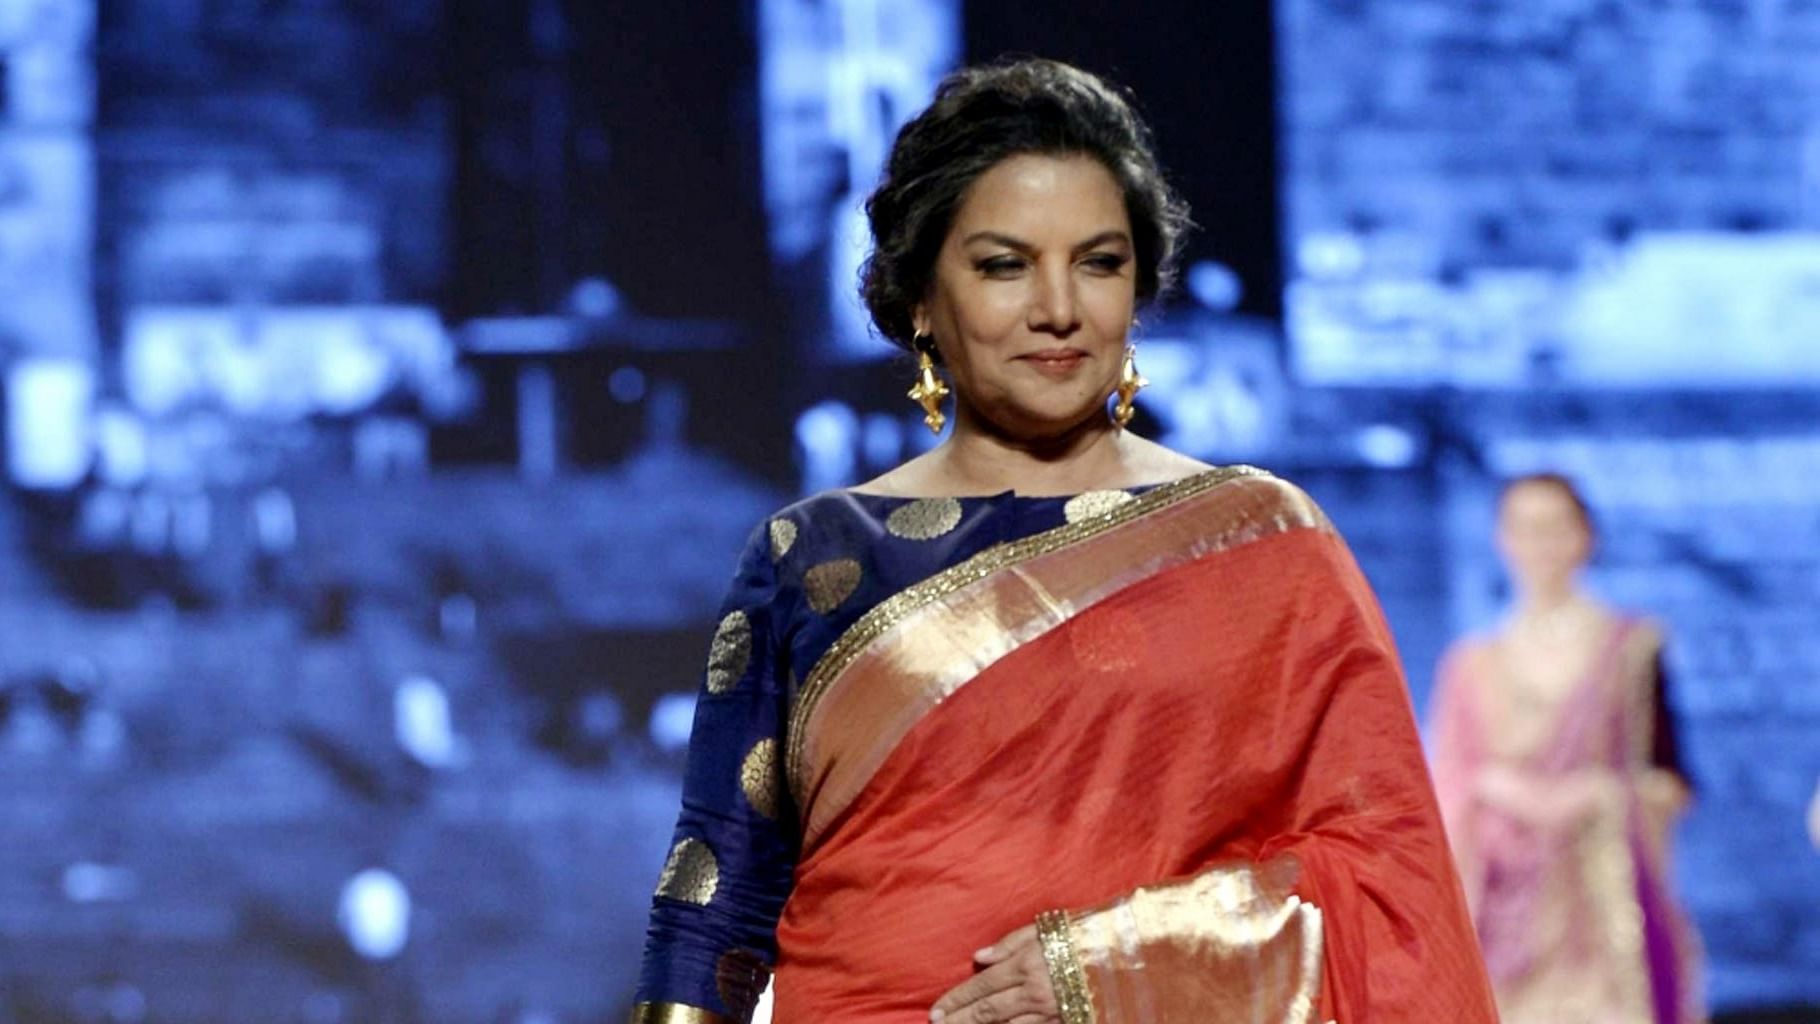 Actress Shabana Azmi during the a show organised by the Cancer Patients Aid Association (CPAA), in Mumbai on Sunday, 20 March 2016. (Photo: IANS)